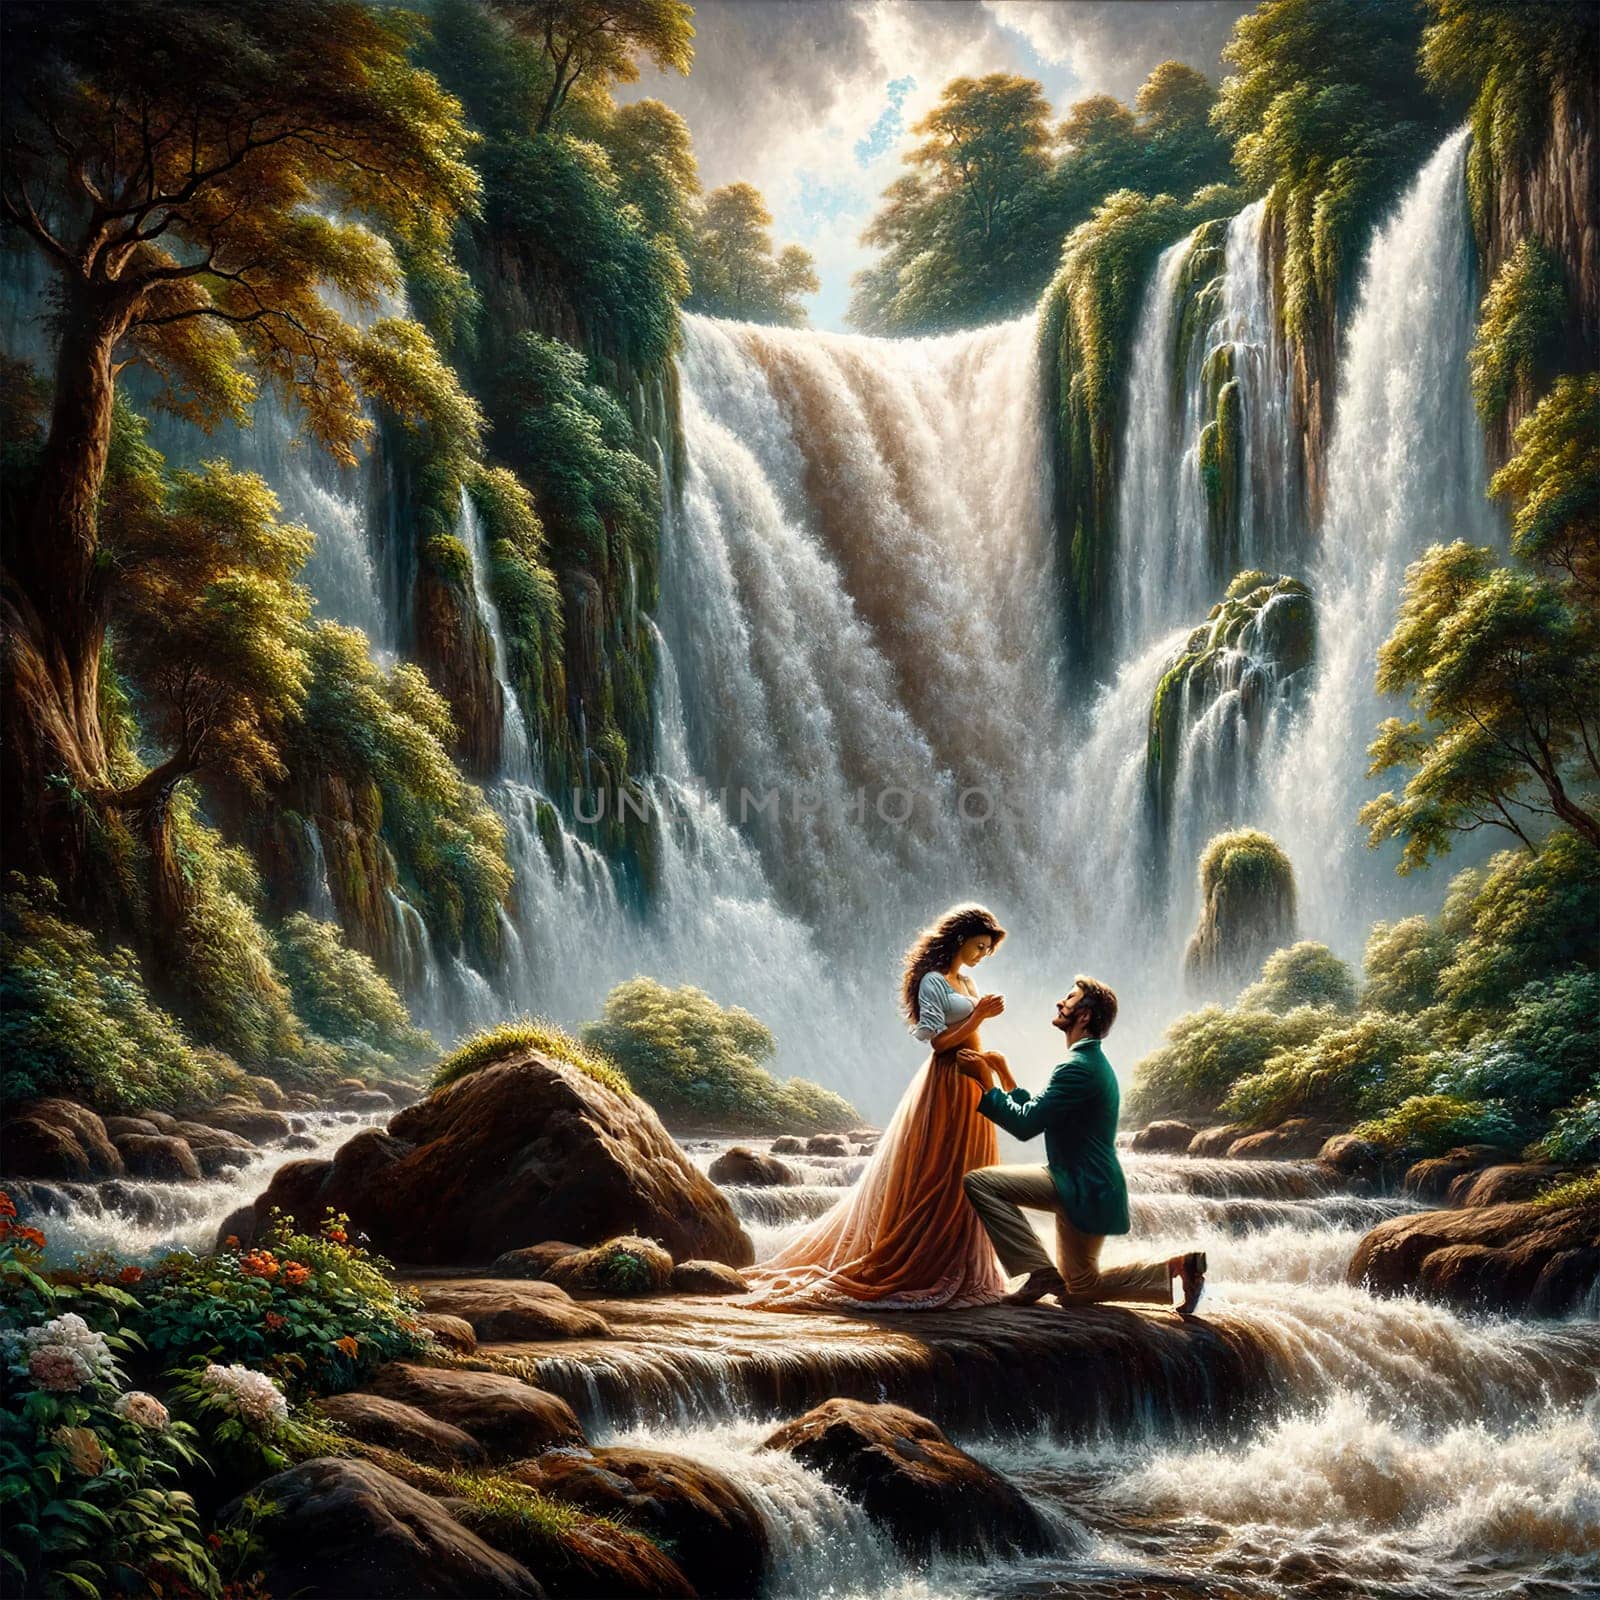 Amidst a breathtaking waterfall oasis, a couple shares a magical moment, a man proposes to a woman dressed in a flowing orange gown, as natures majesty envelops them